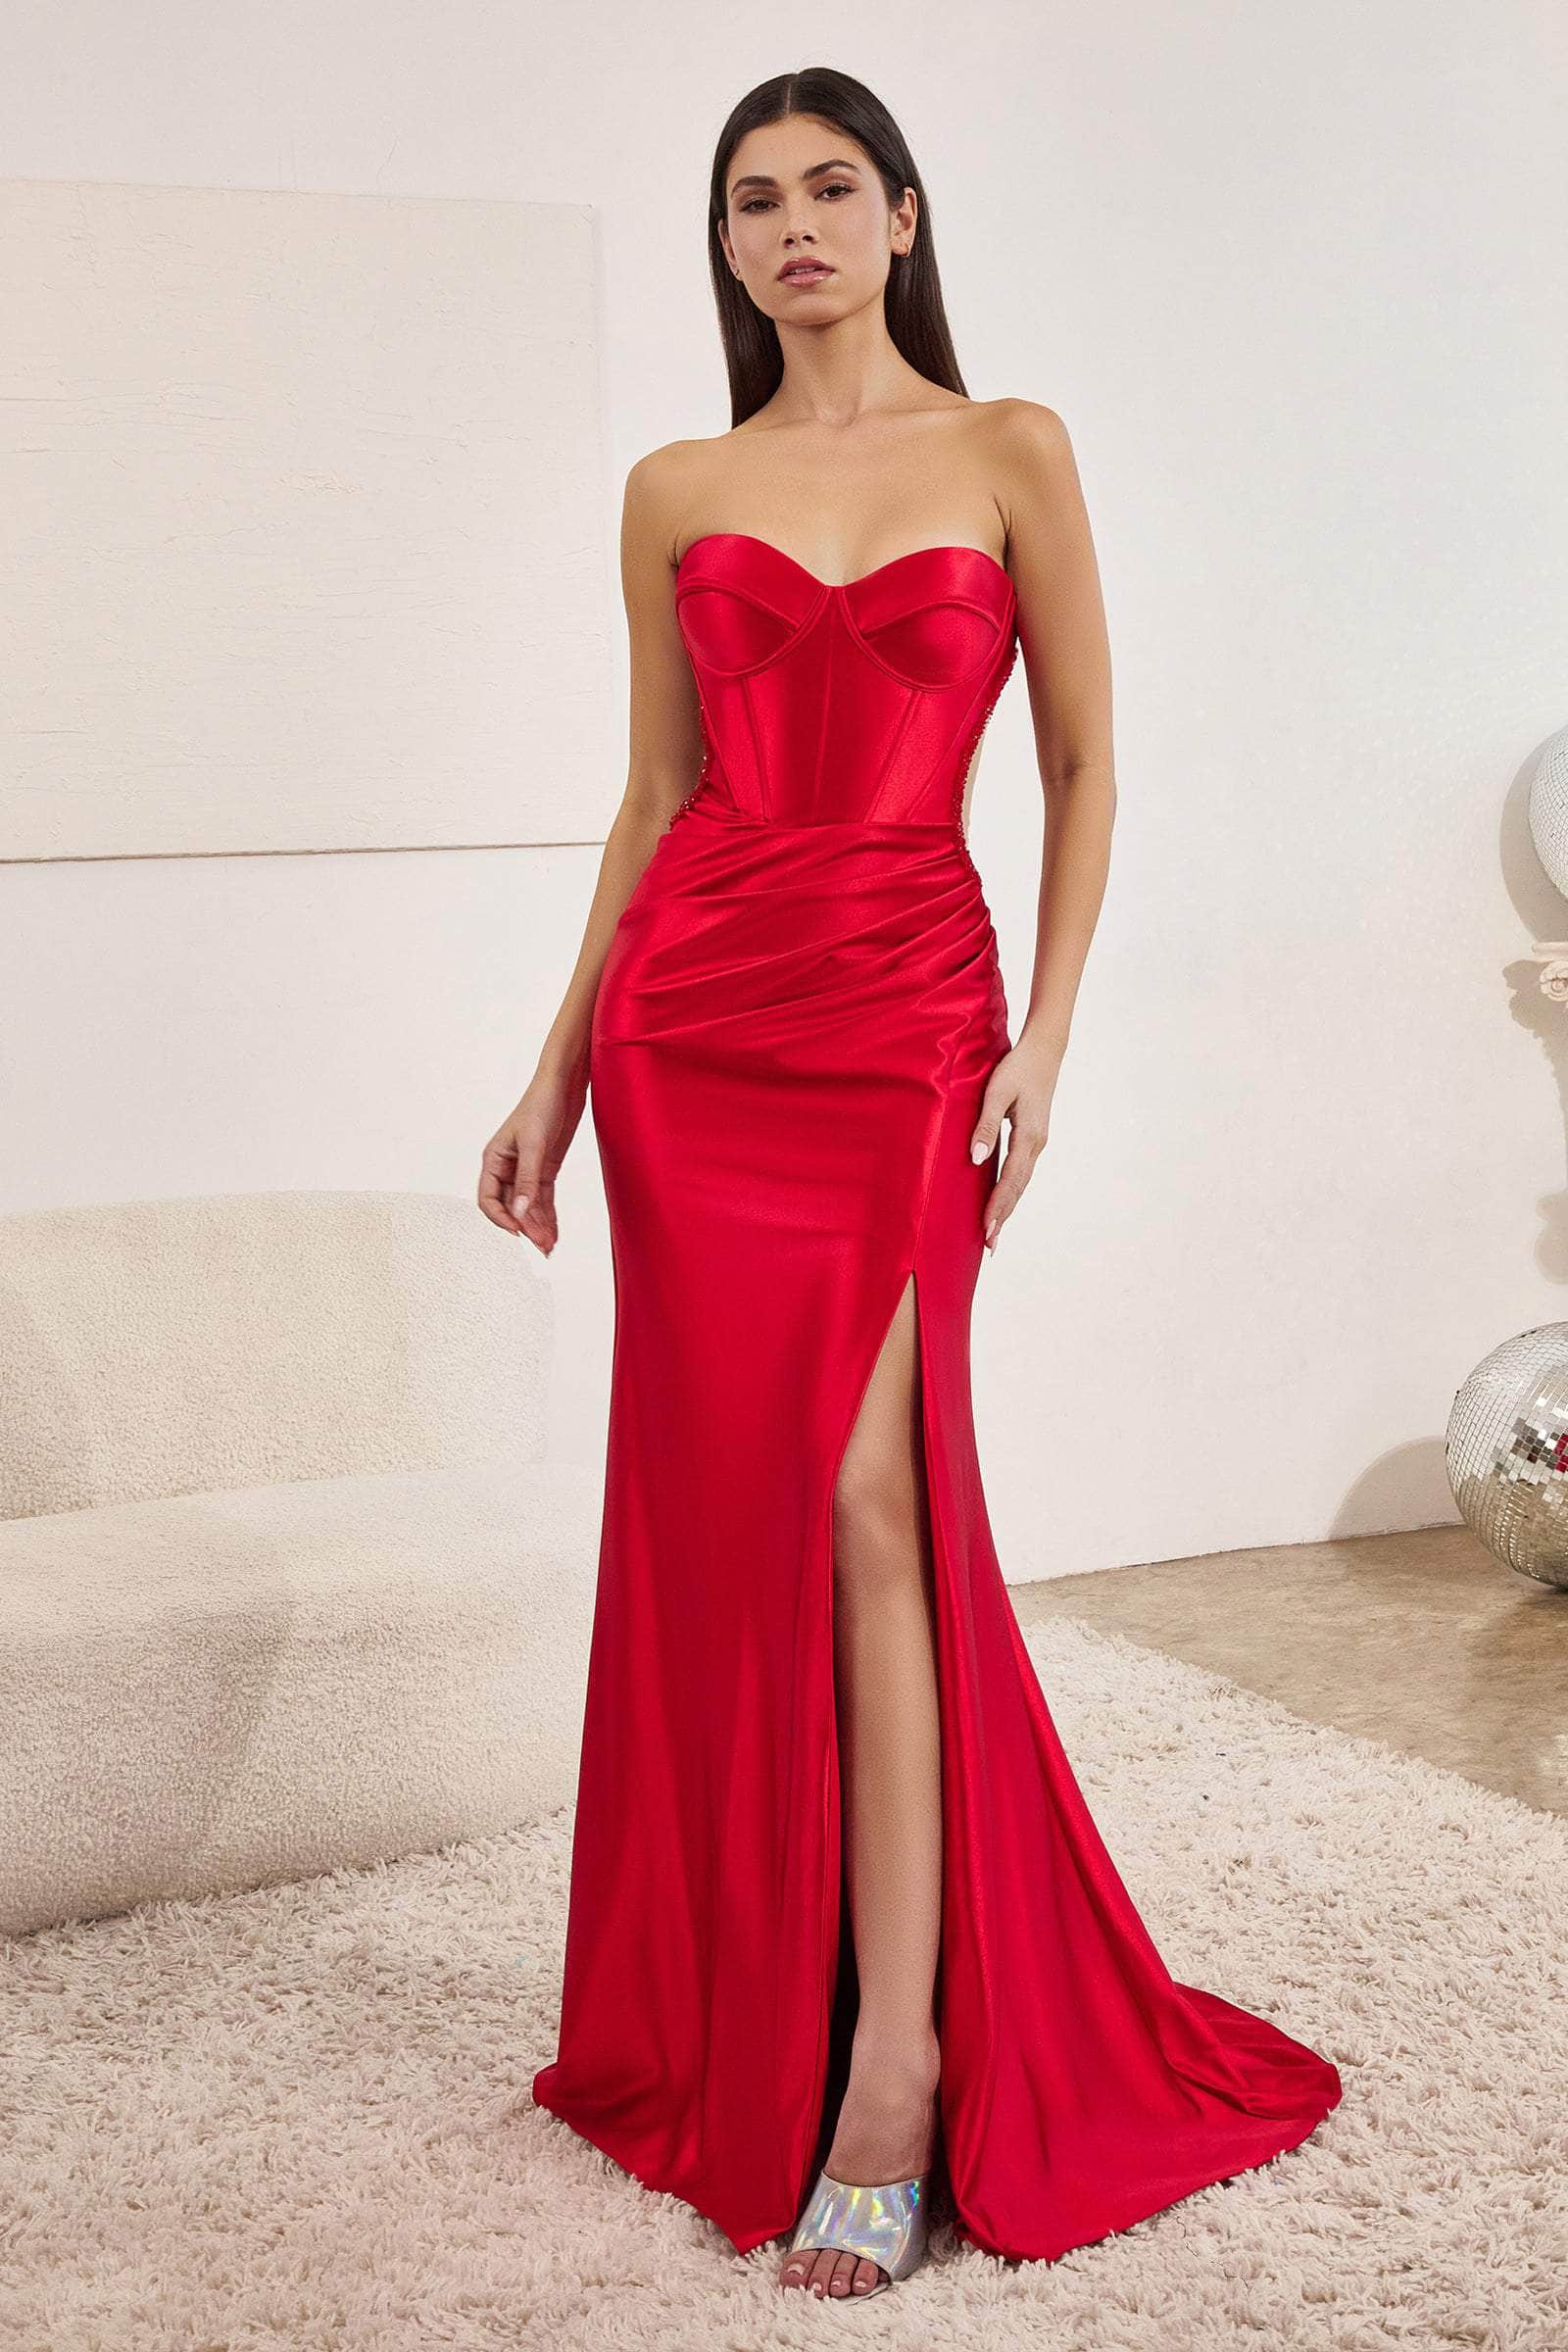 Ladivine CD273 - Sweetheart High Slit Prom Gown
